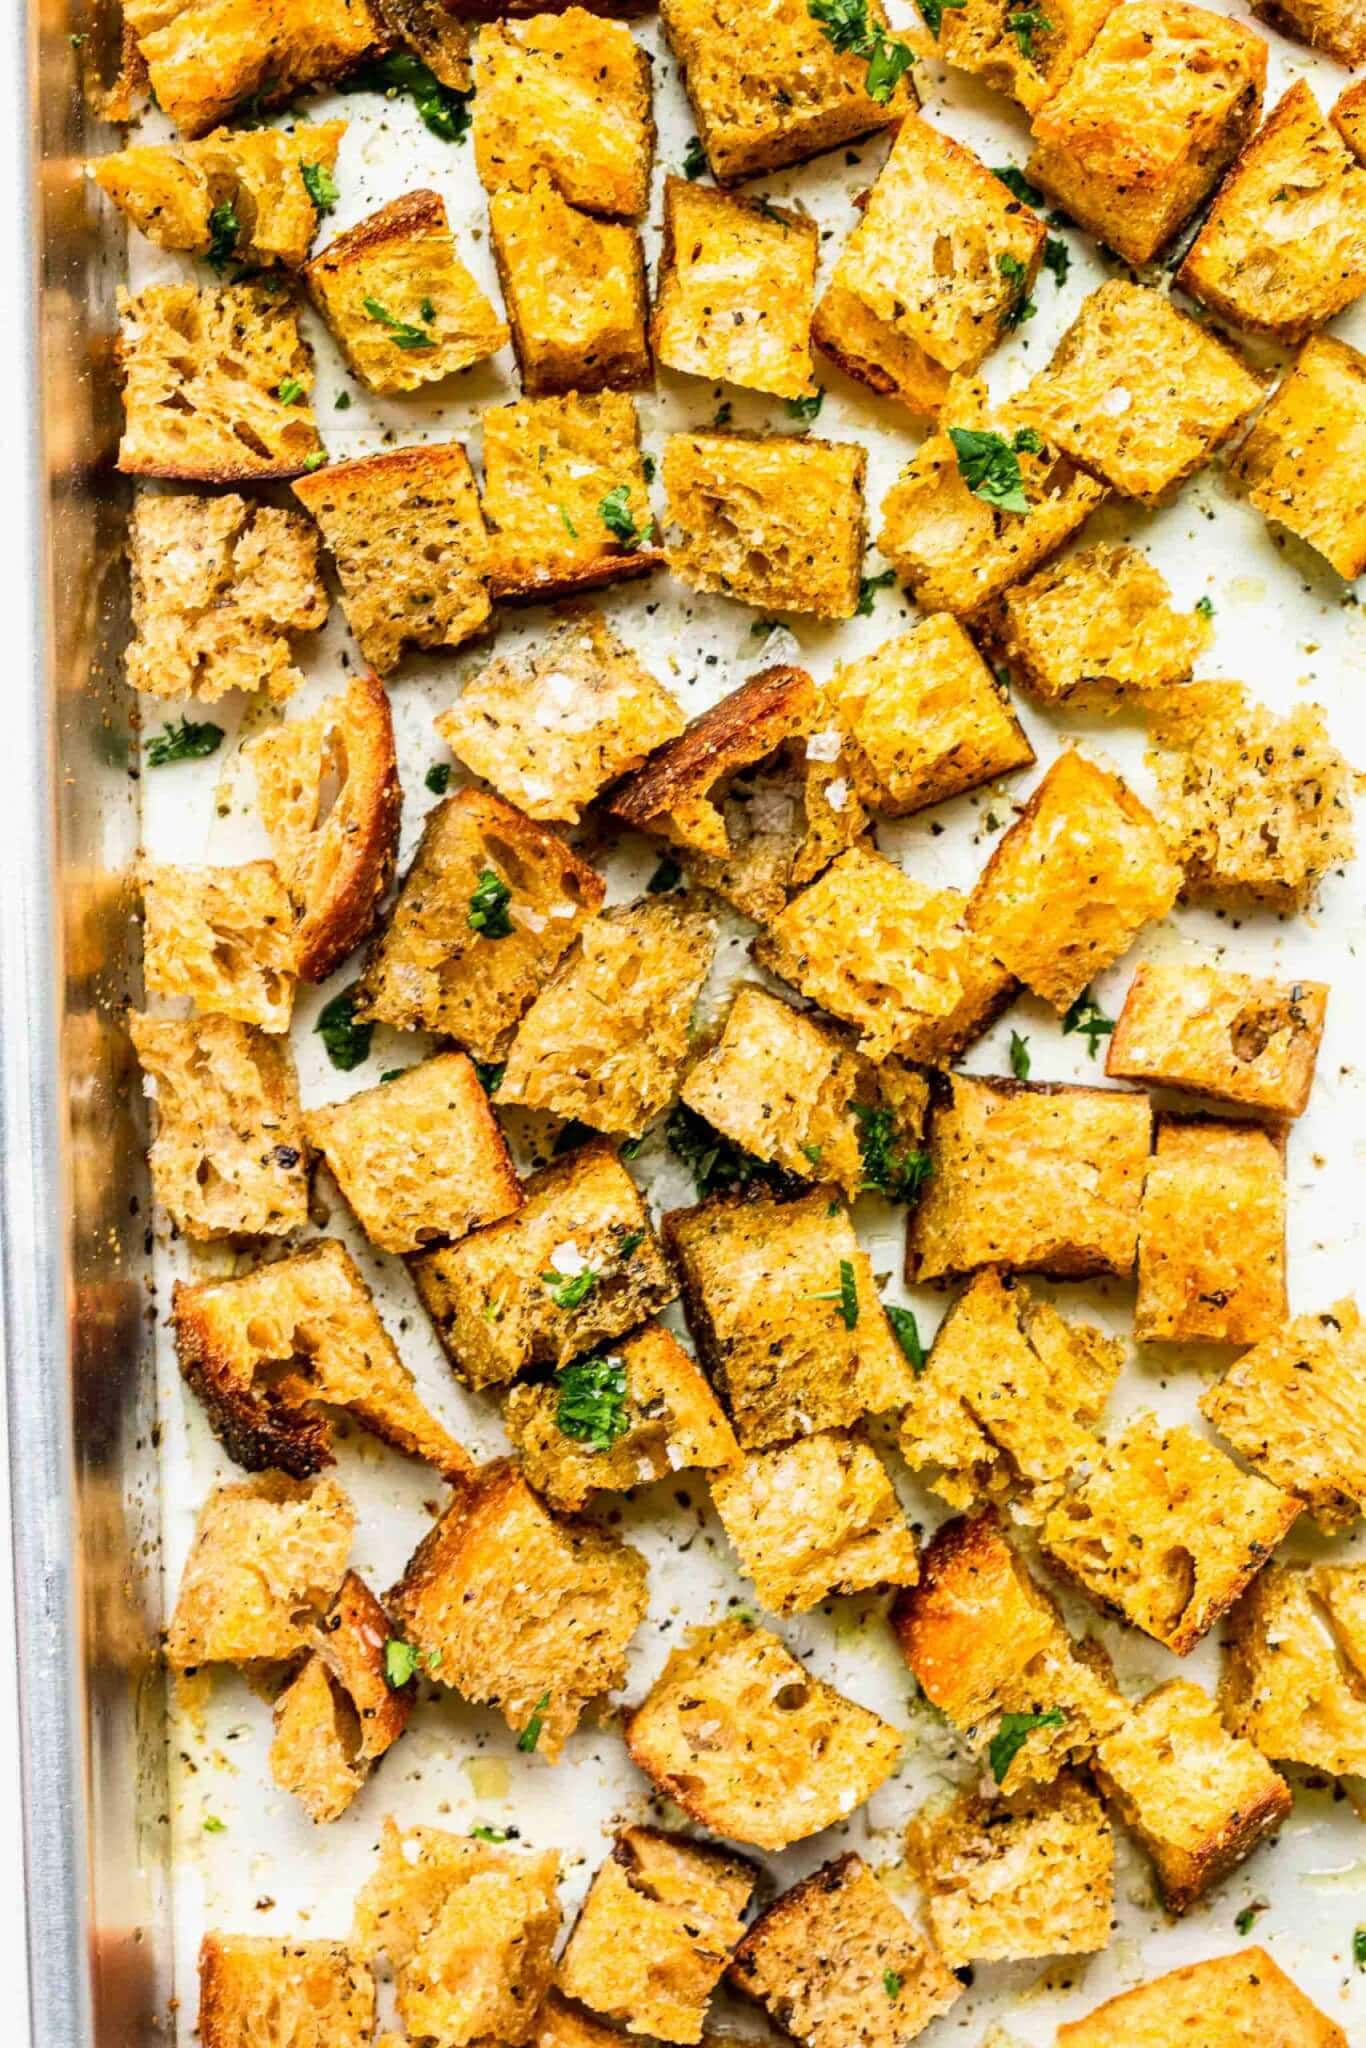 Croutons on baking sheet after cooking.